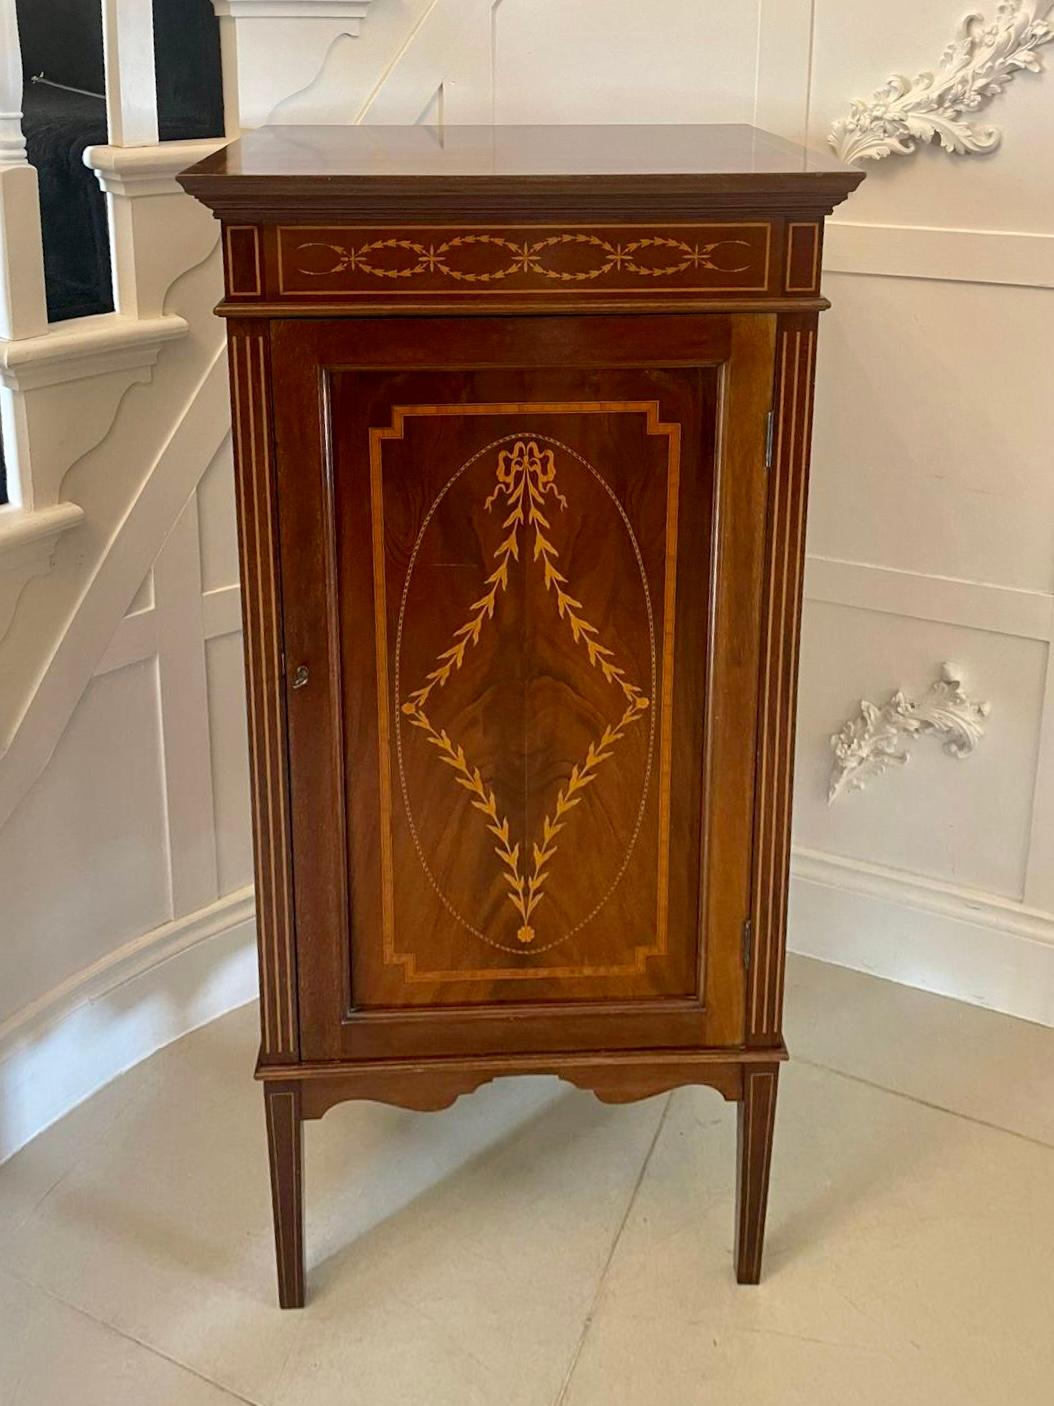 Superb quality antique Edwardian mahogany inlaid side cabinet having a quality mahogany top crossbanded in satinwood, mahogany inlaid frieze,  one single panelled door inlaid with satinwood opening to reveal four shelves, mahogany sides with